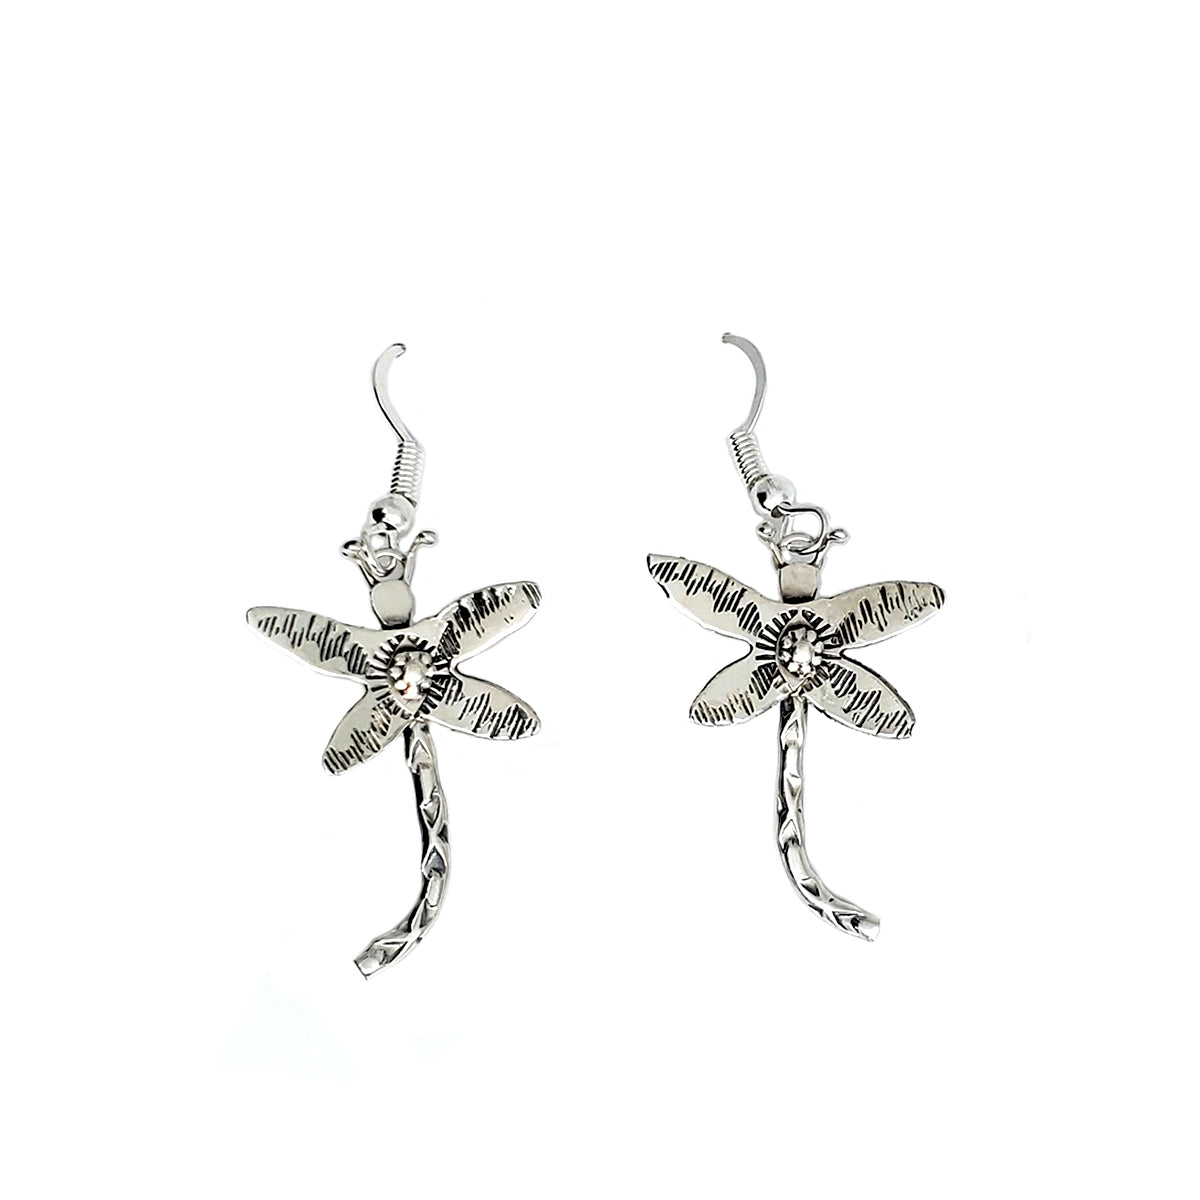 Sterling silver small dragonfly earrings with sterling silver ear wires These delicate earrings are hand stamped and measure approx. 1 inch long, they dangle approx. 1.50 inches from earlobe By Diné silversmith Lucille Platero